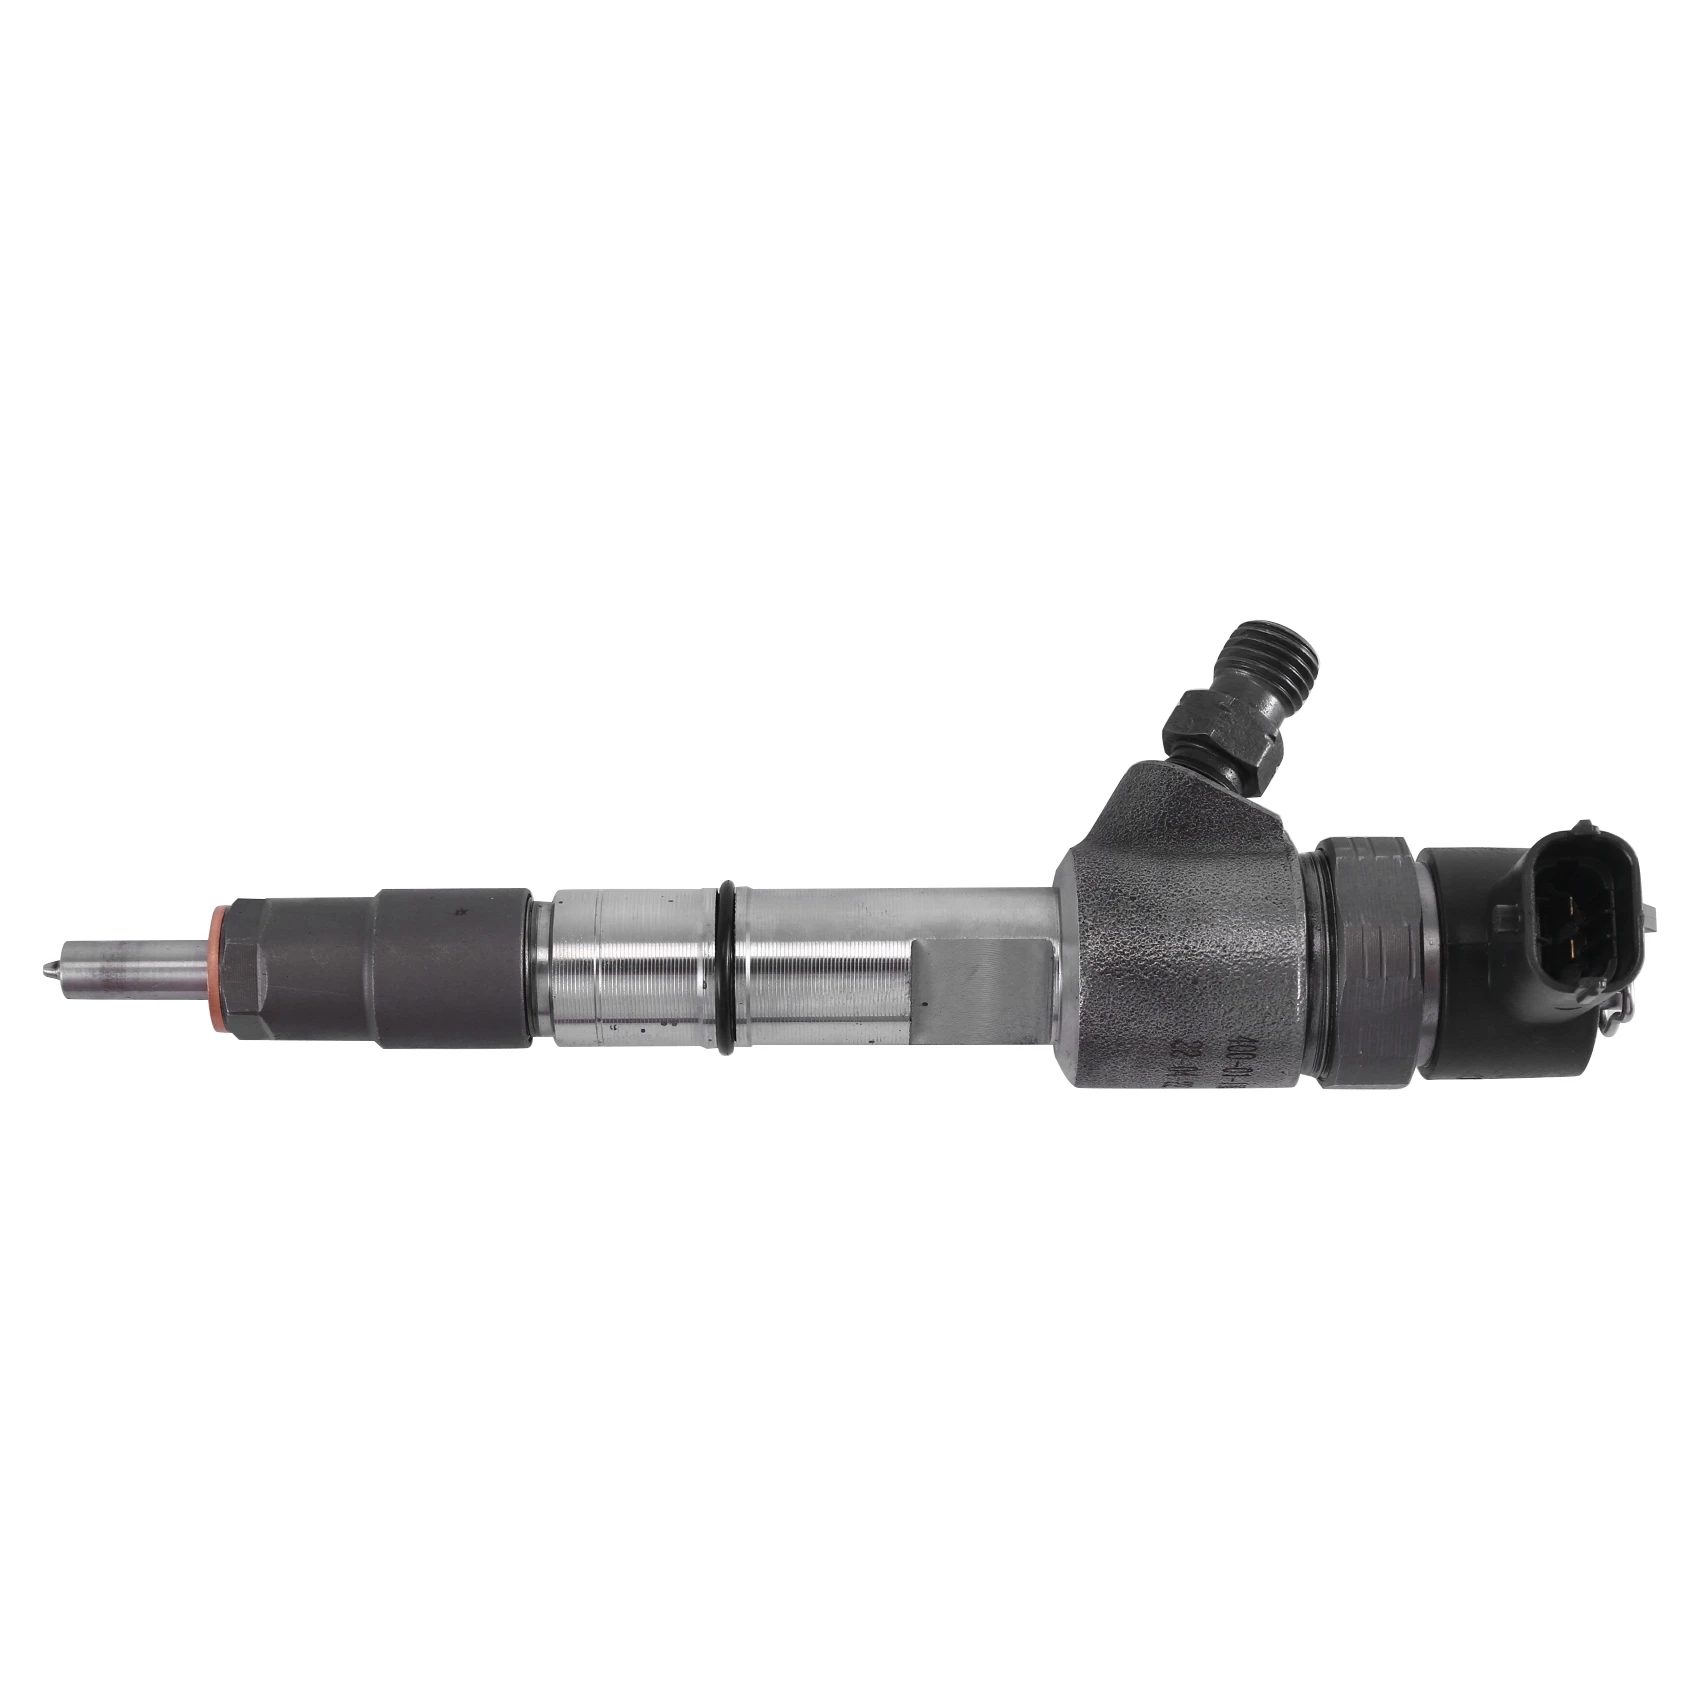 New Diesel Common Rail Fuel Injector Nozzle 0445110533 enlarge